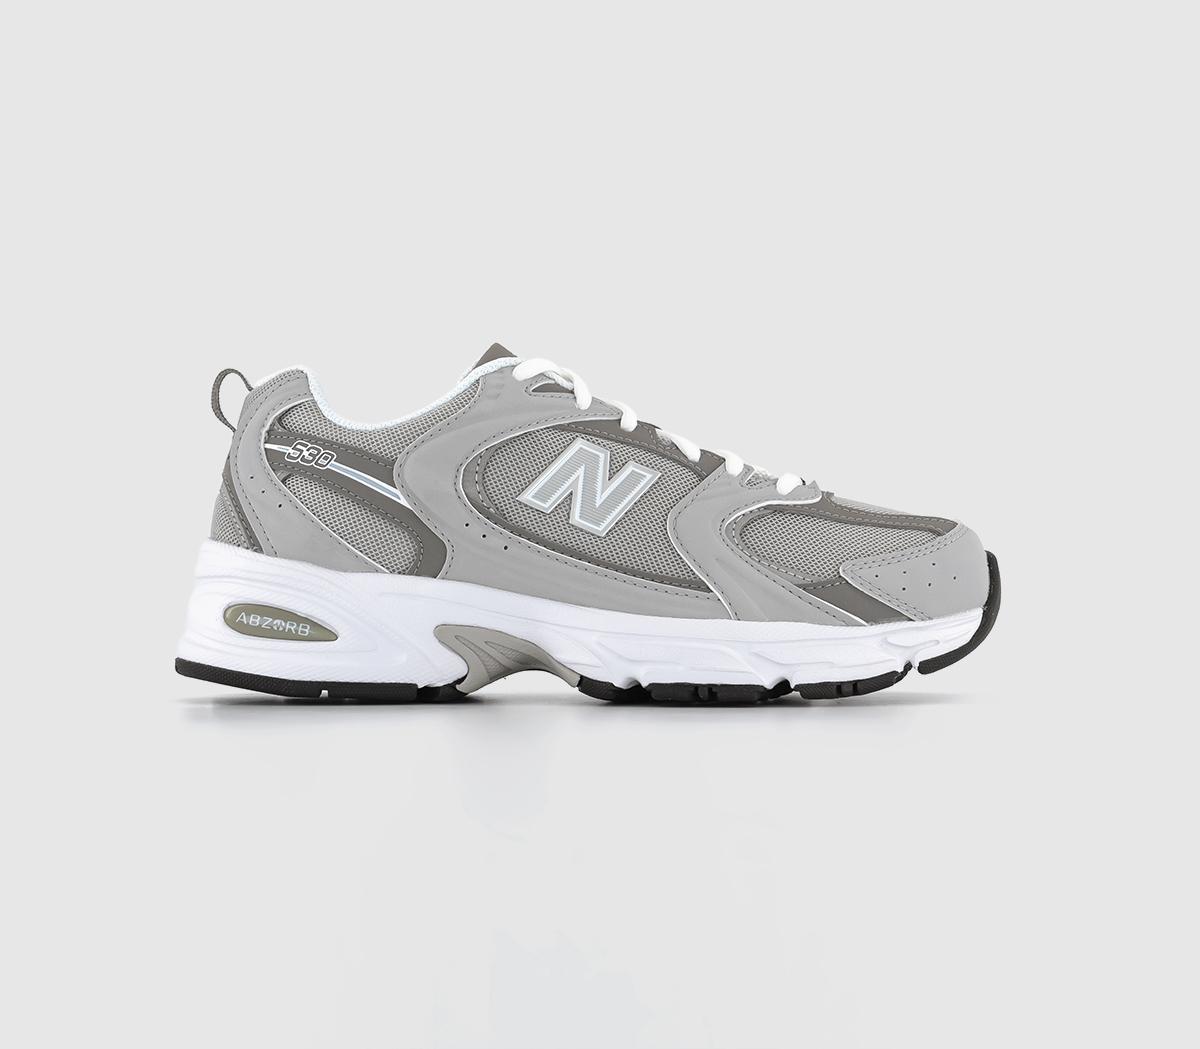 New Balance Mr530 Trainers Grey Silver White - Men's Trainers